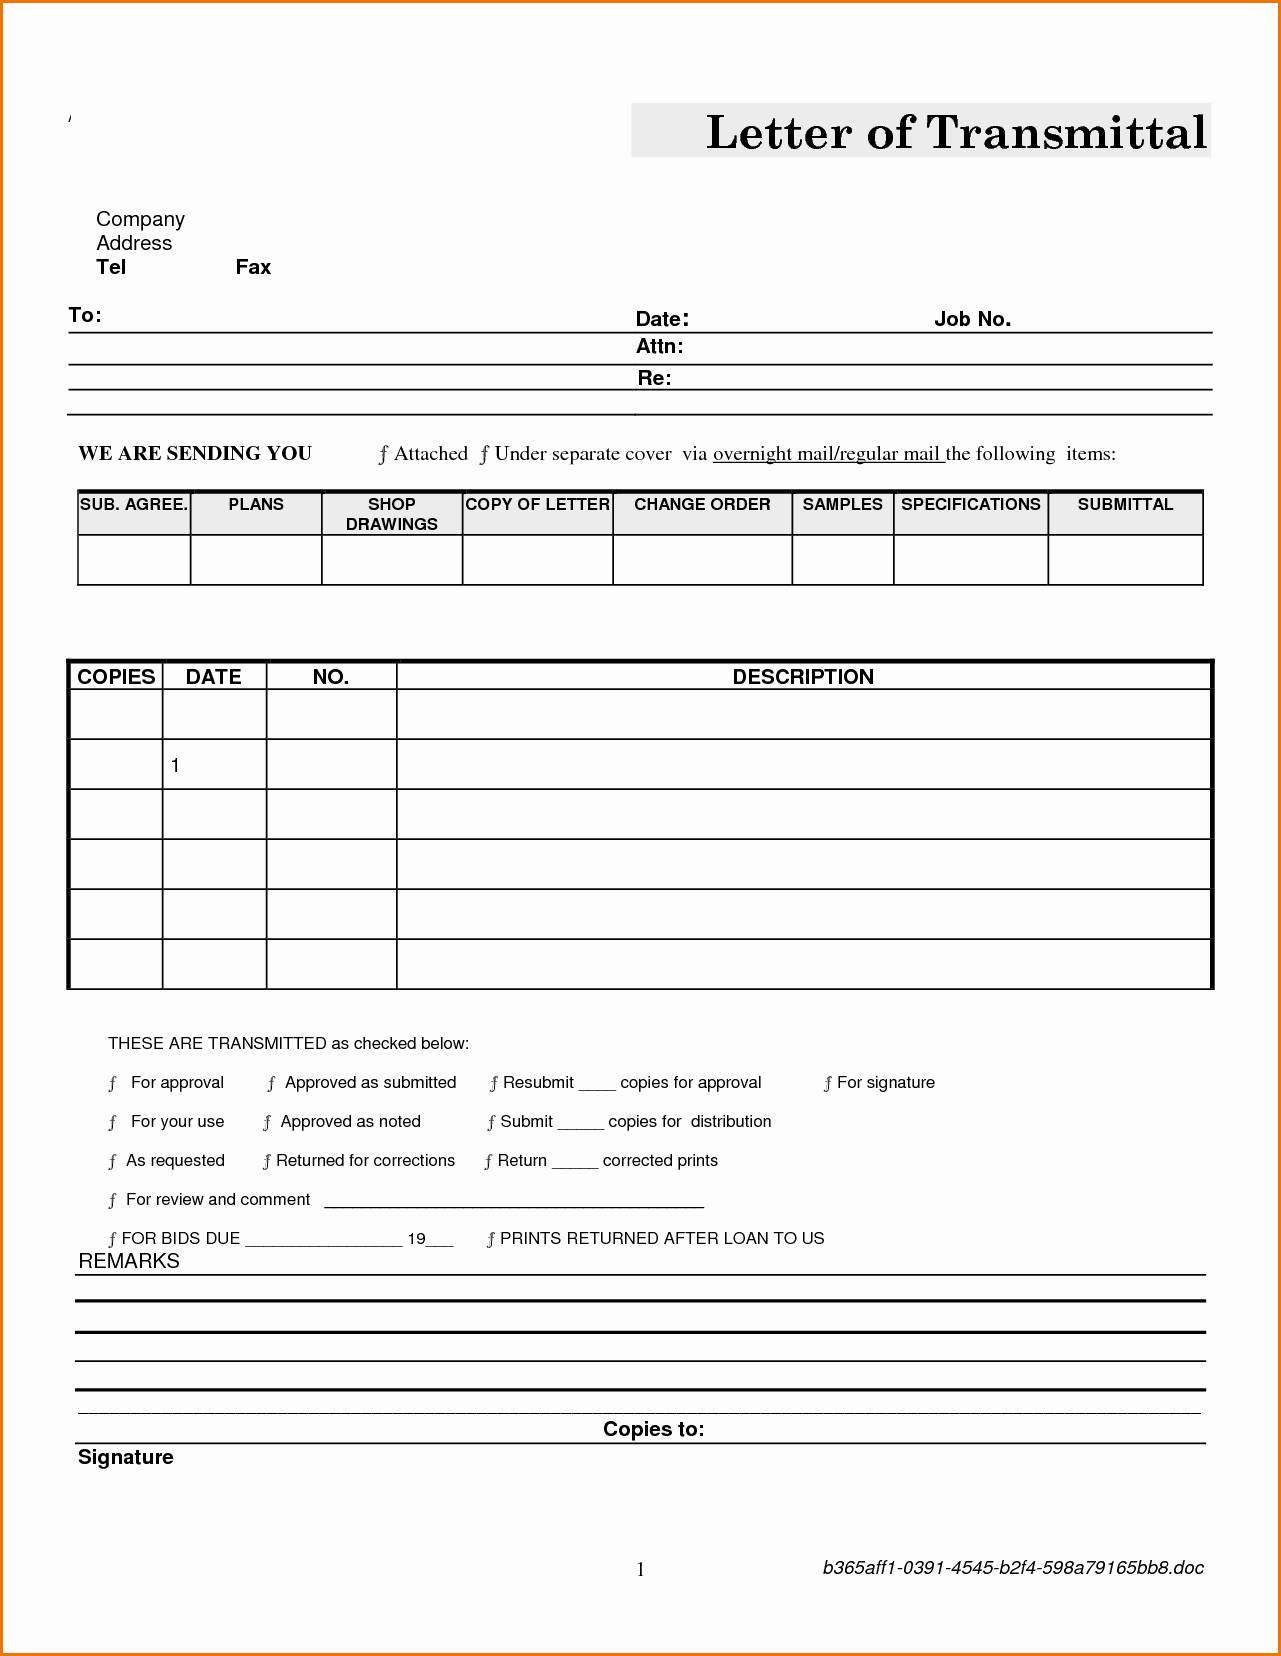 letter of transmittal template doc example-Transmittal form Sample Template New Construction Transmittal Letter Template 19-b